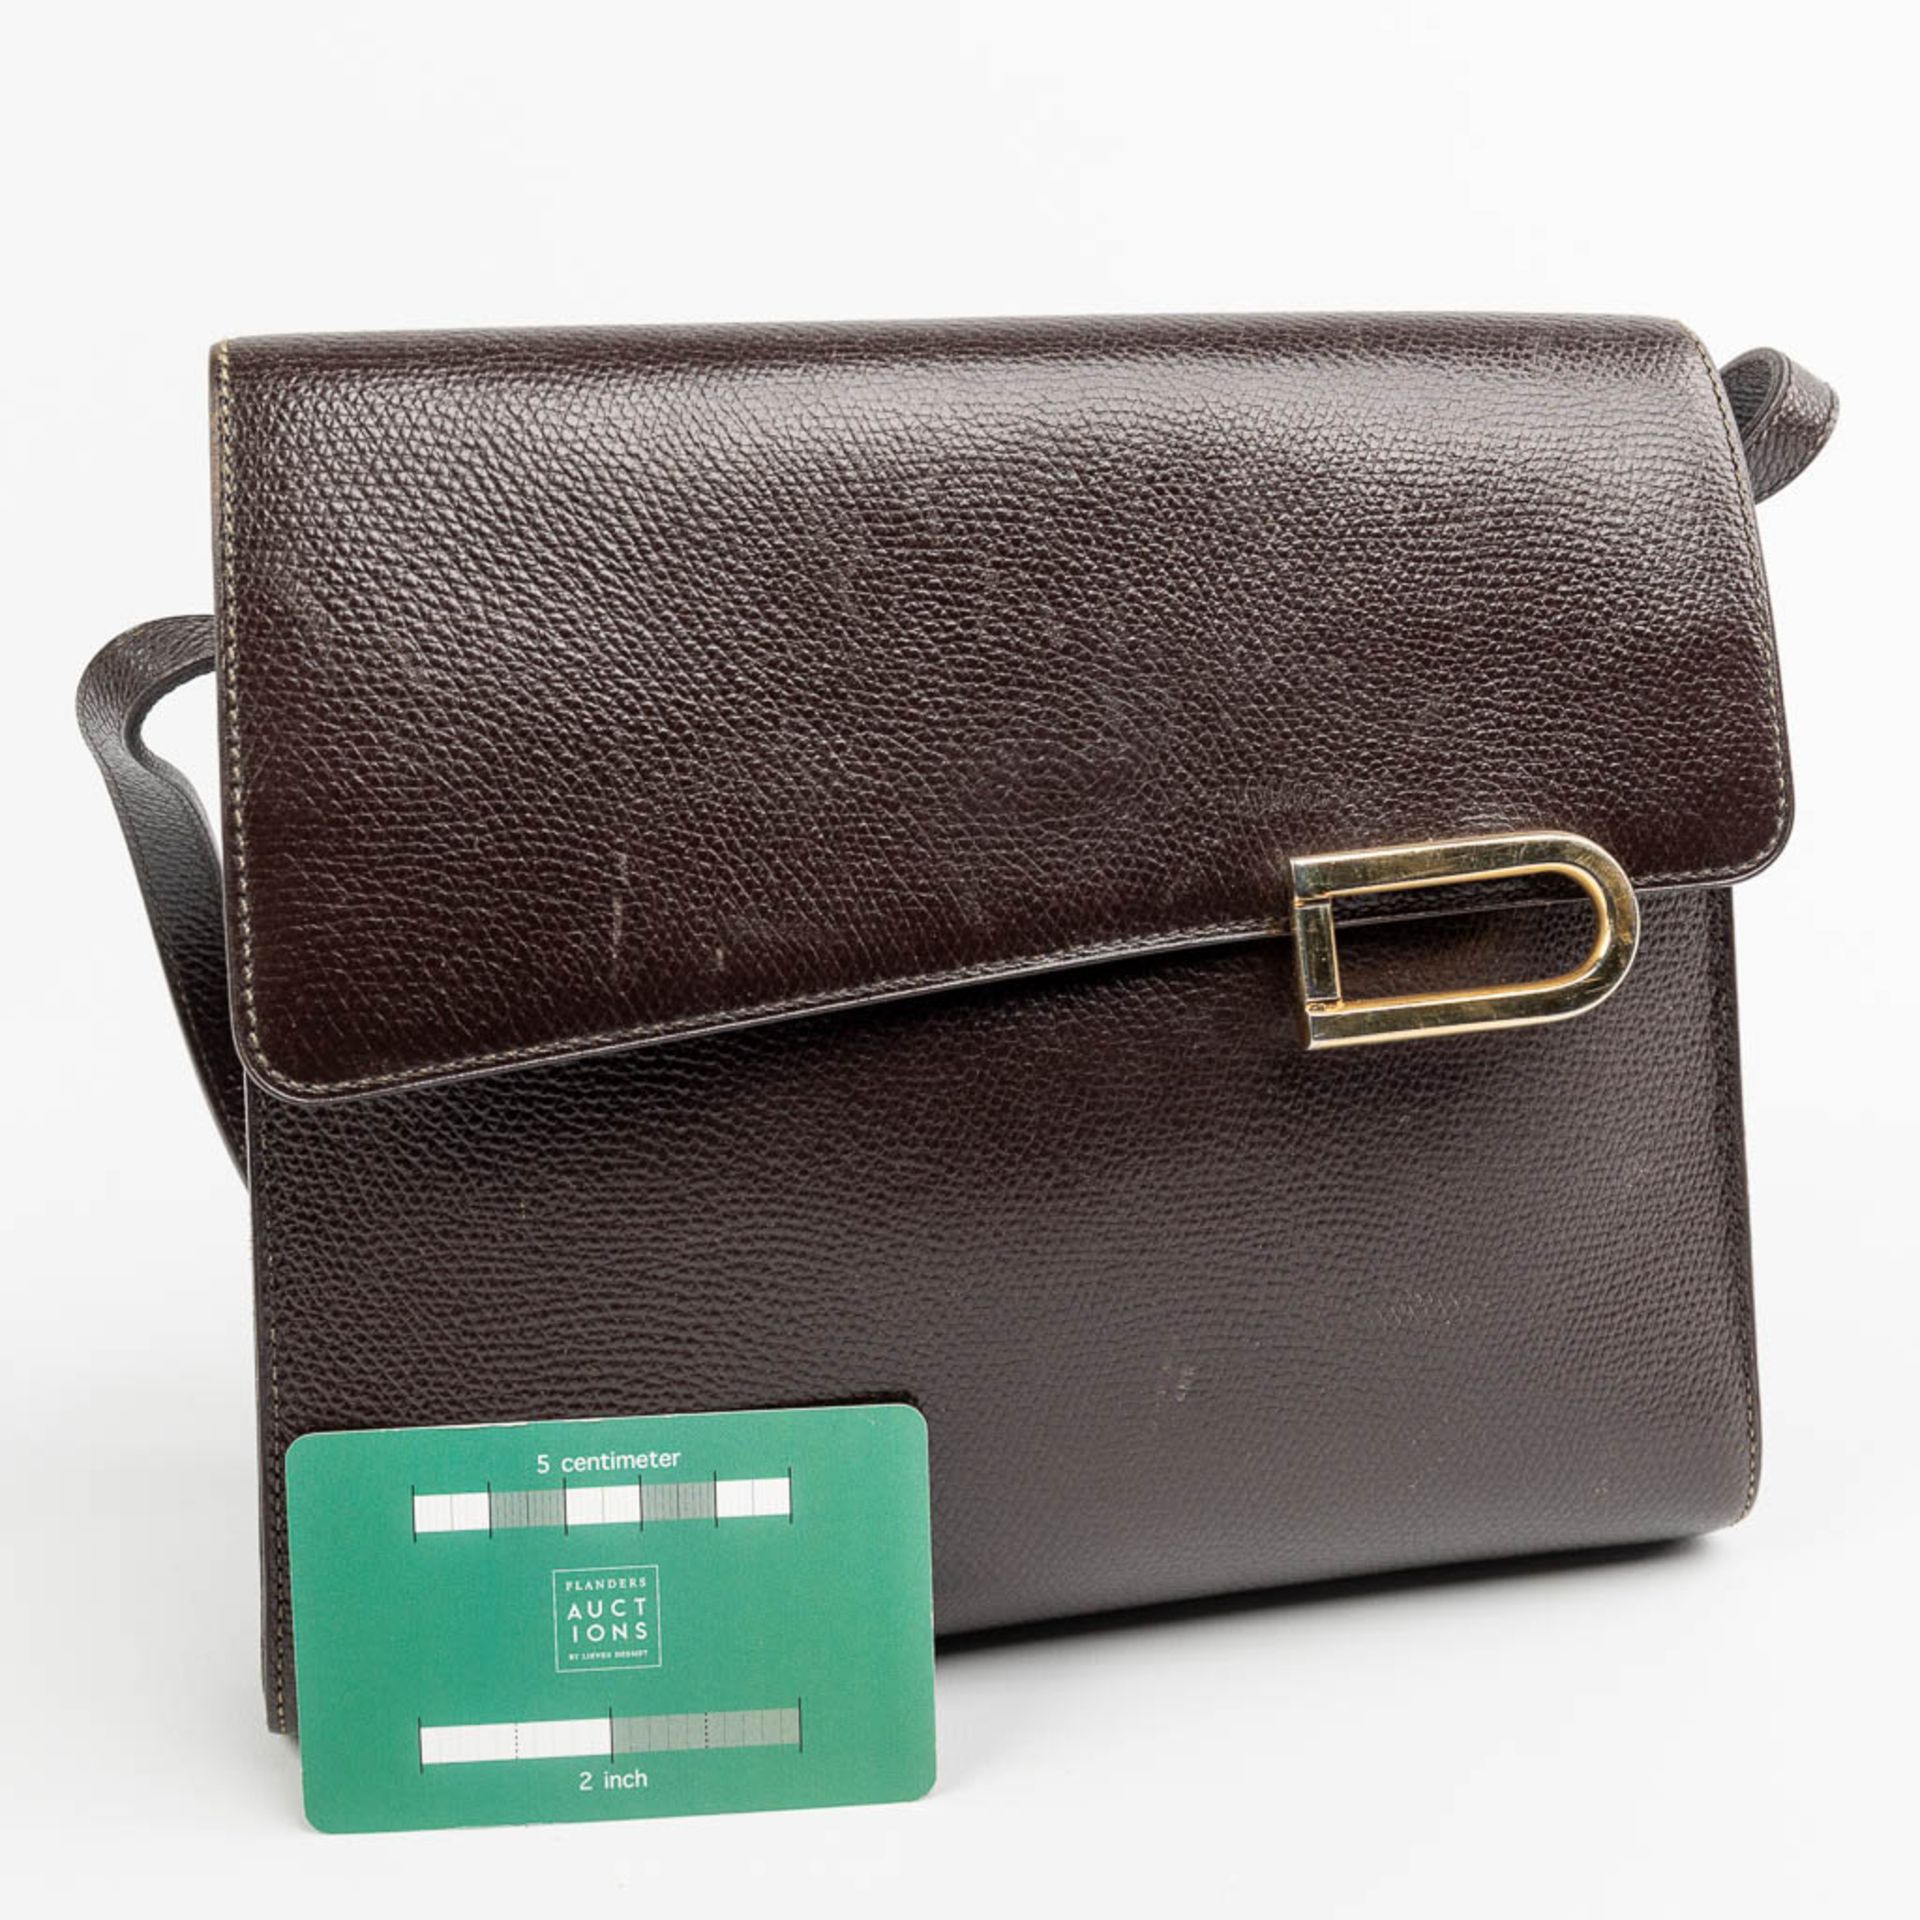 A purse made of brown leather and marked Delvaux. - Image 6 of 12